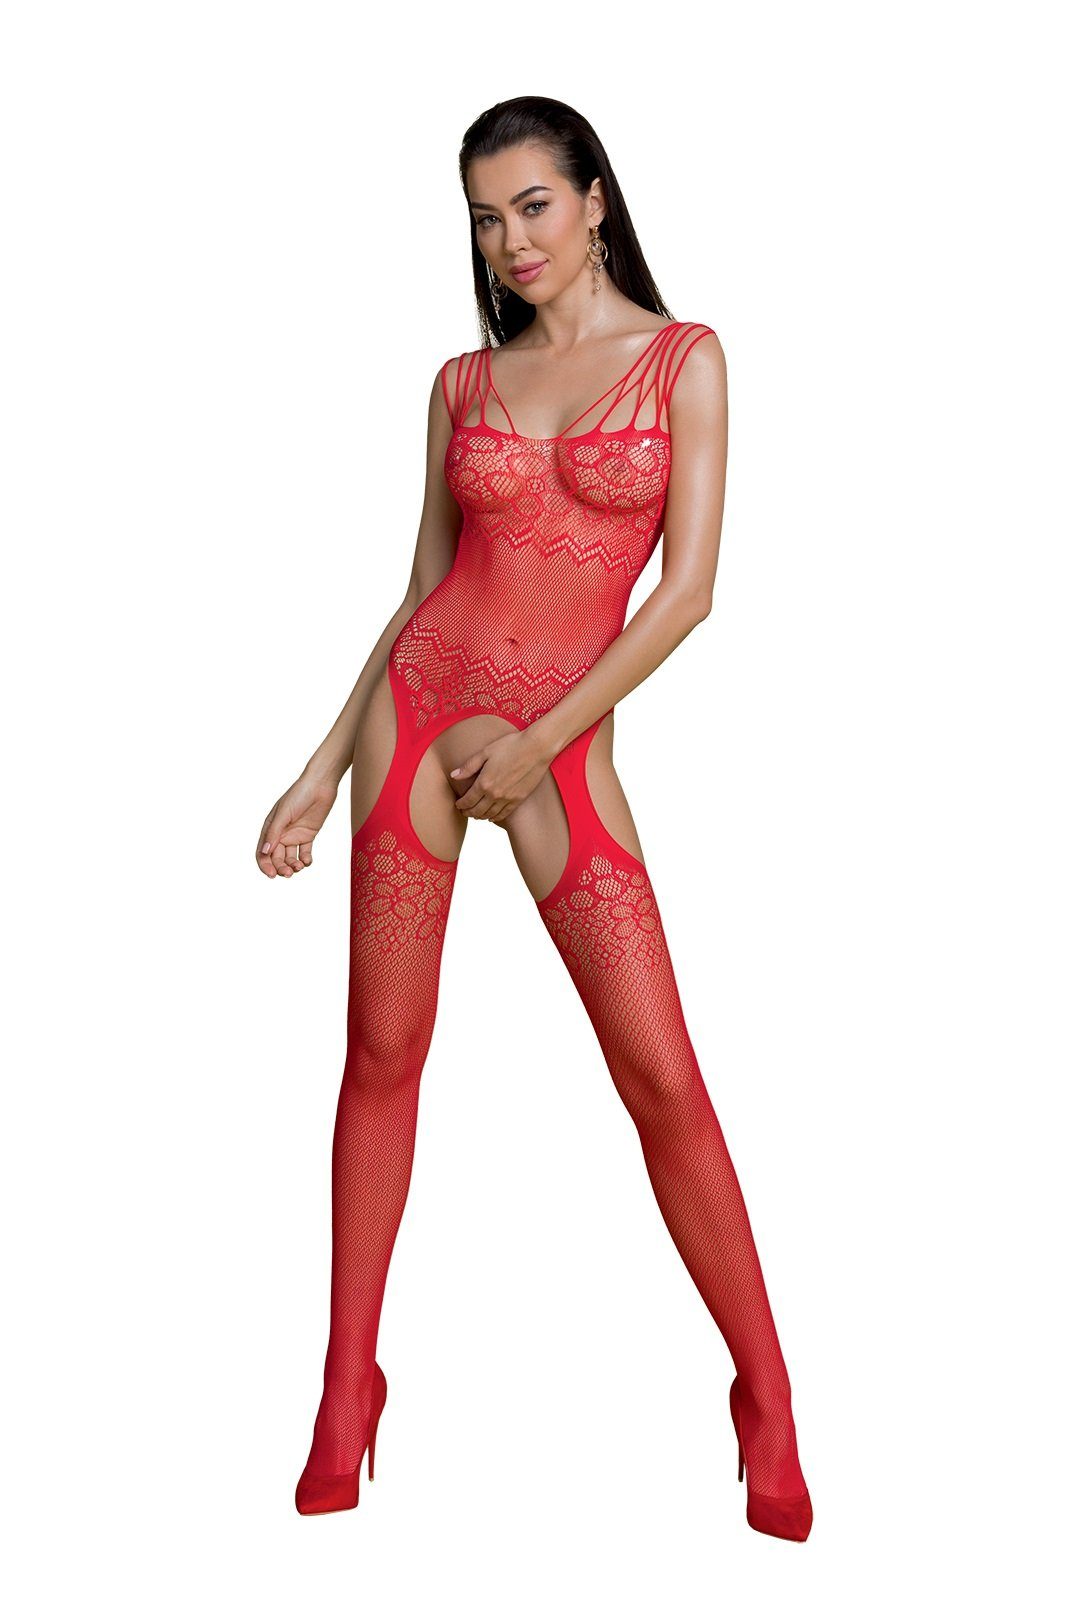 ouvert Netz Passion (1 Eco Passion 20 DEN St) Catsuit Bodystocking Collection transparent rot Bodystocking